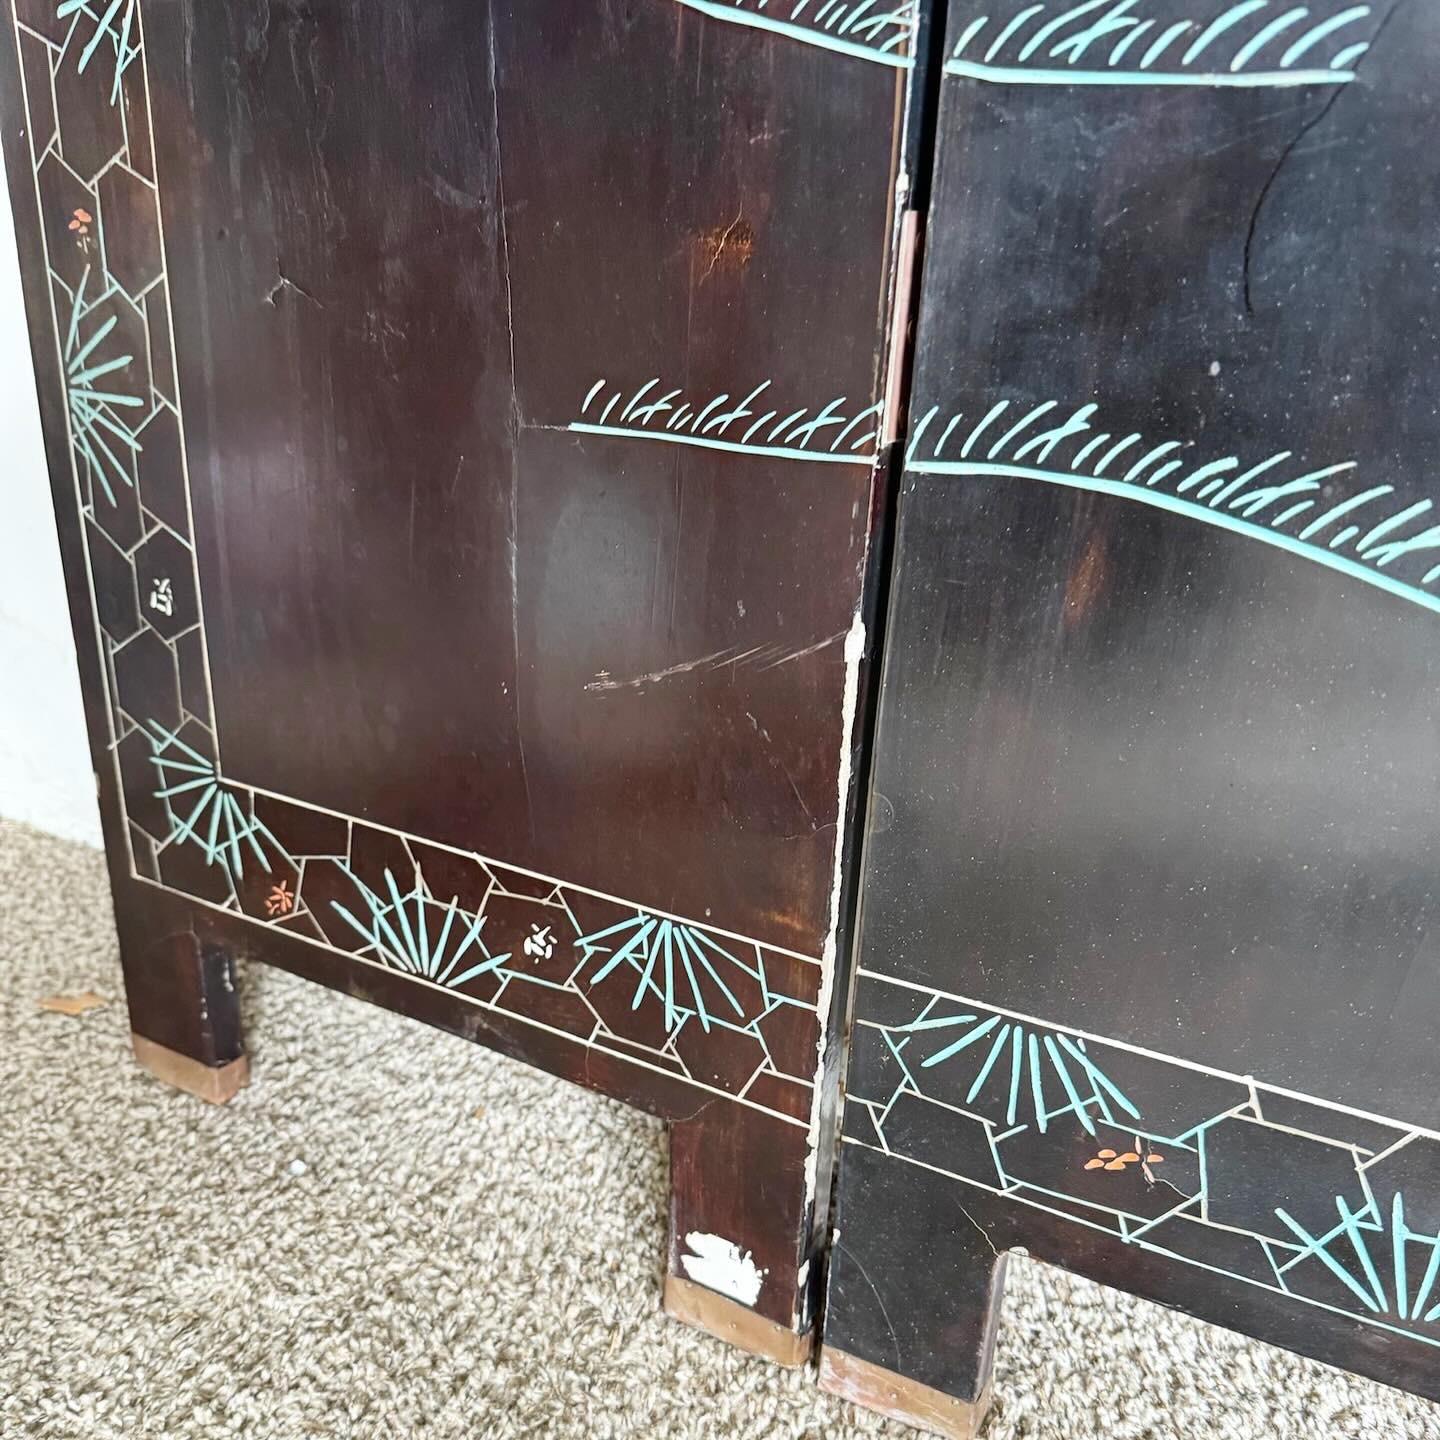 Late 20th Century Chinese Black Lacquered and Hand Carved/Painted Room Divider/Screen - 6 Panels For Sale